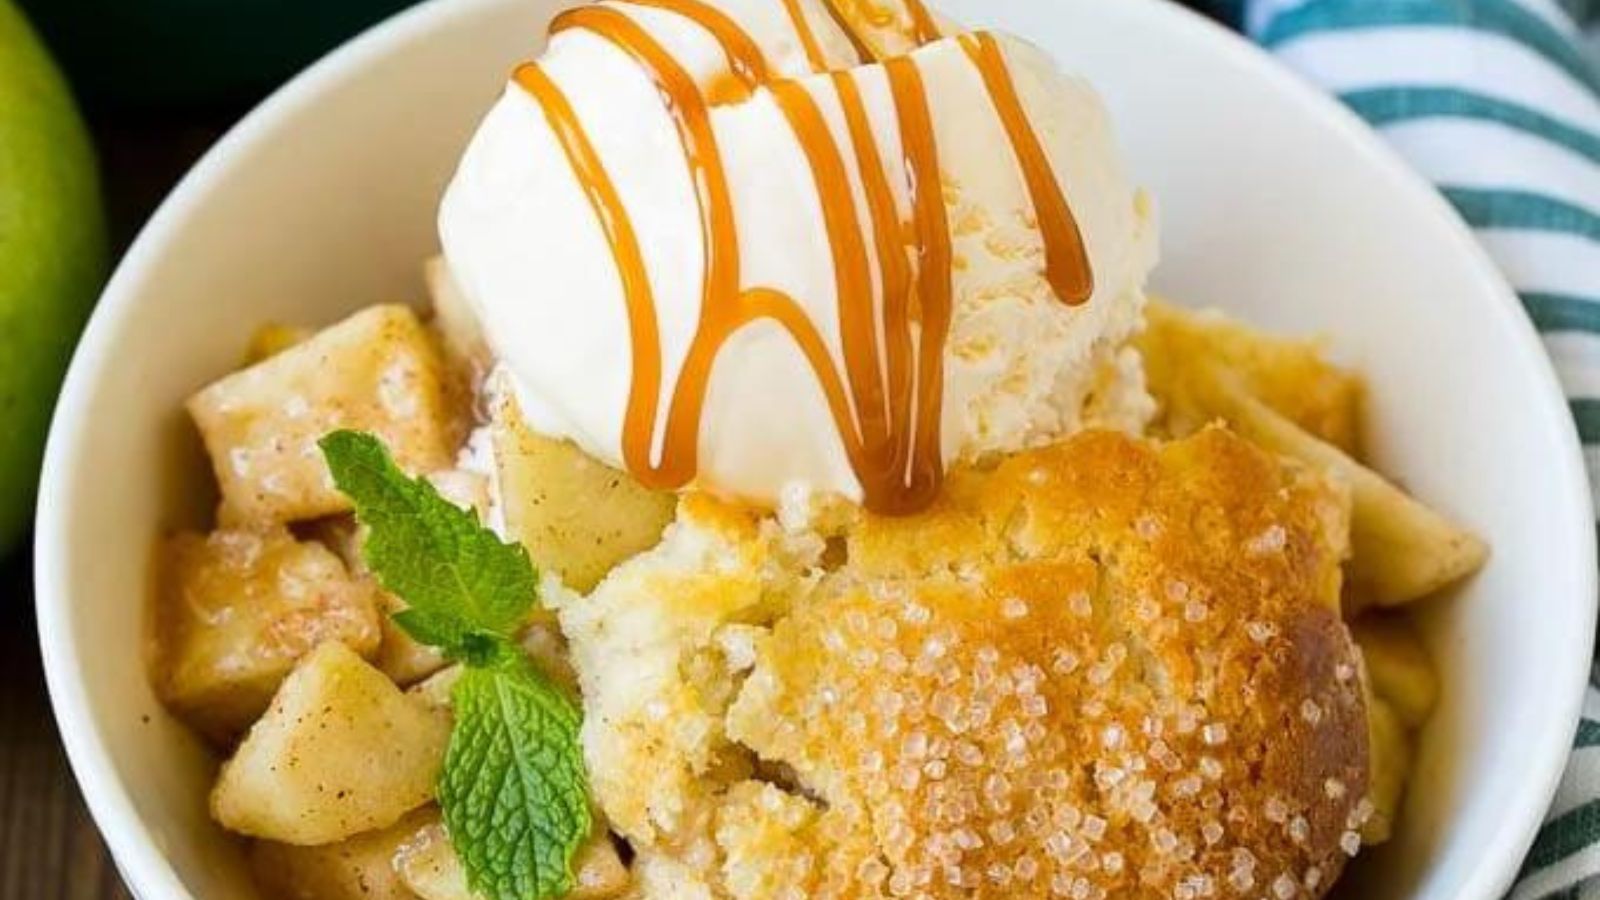 16 Scrumptious Apple Desserts to Warm Up Your Winter Nights